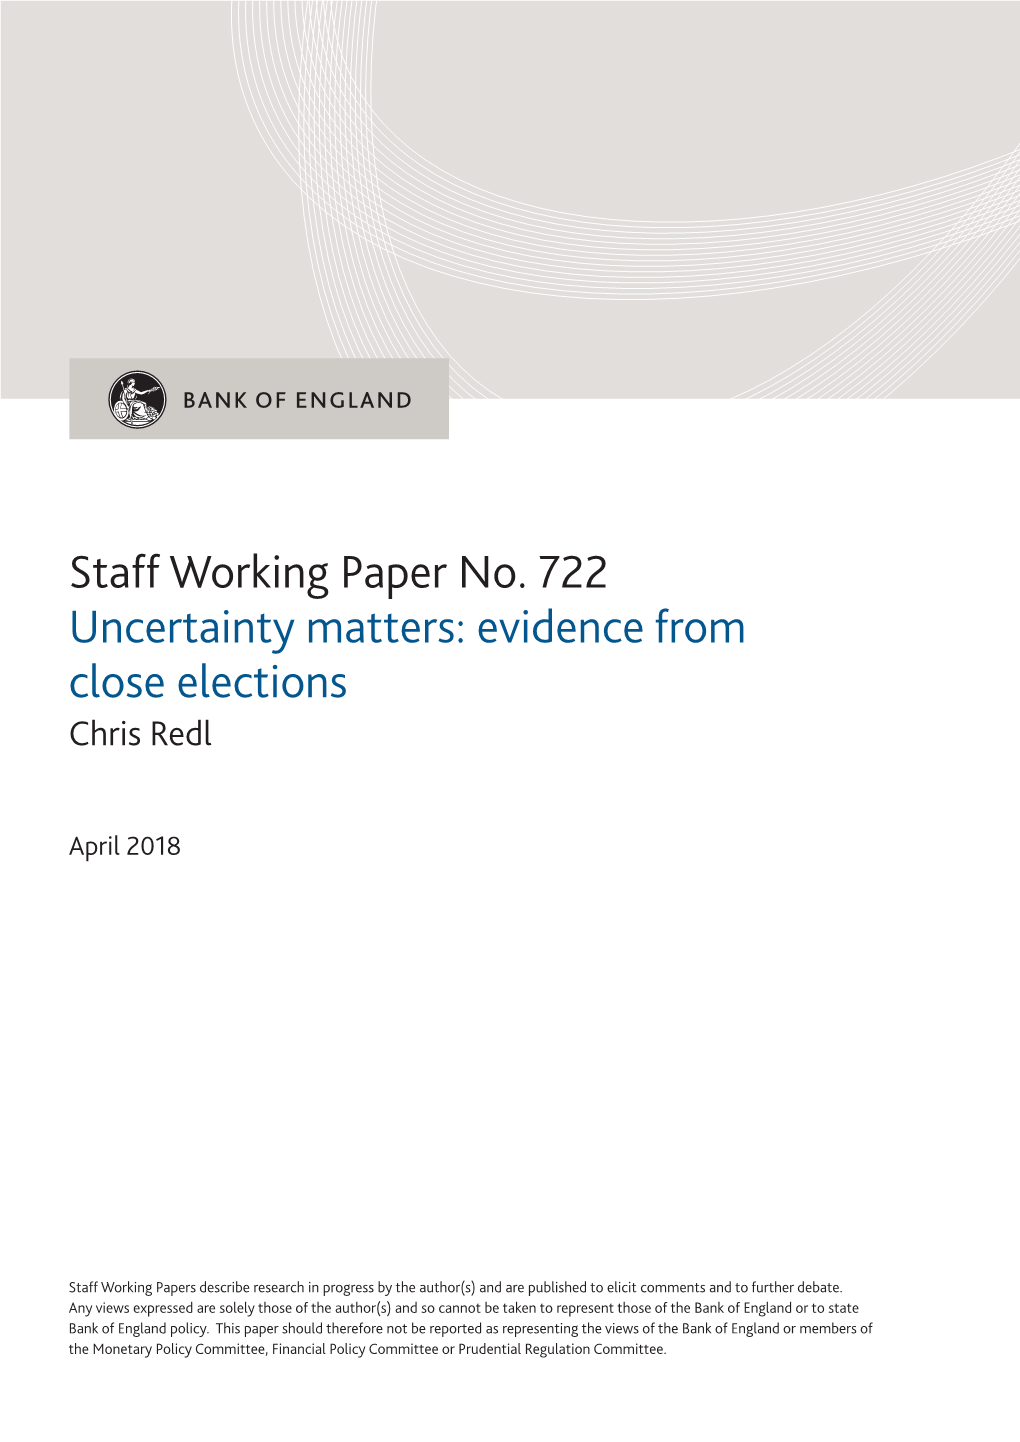 Staff Working Paper No. 722 Uncertainty Matters: Evidence from Close Elections Chris Redl